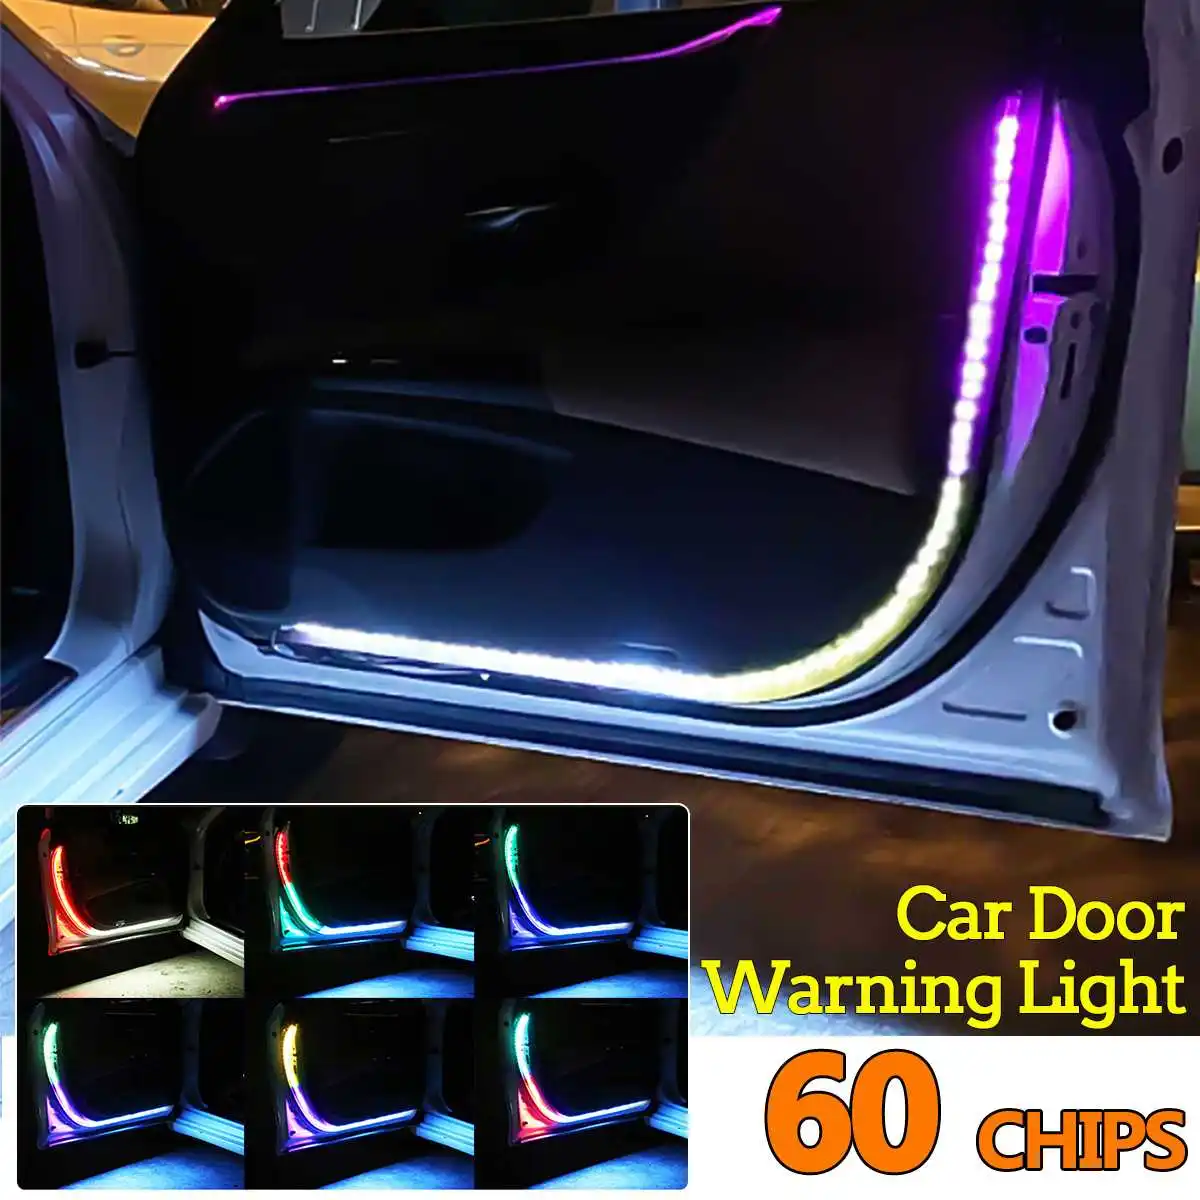 

Universal 120cm Car Door Opening Warning LED Lights Strips Welcome Decor Lamp Strip Anti Rear-end Collision Safety Light